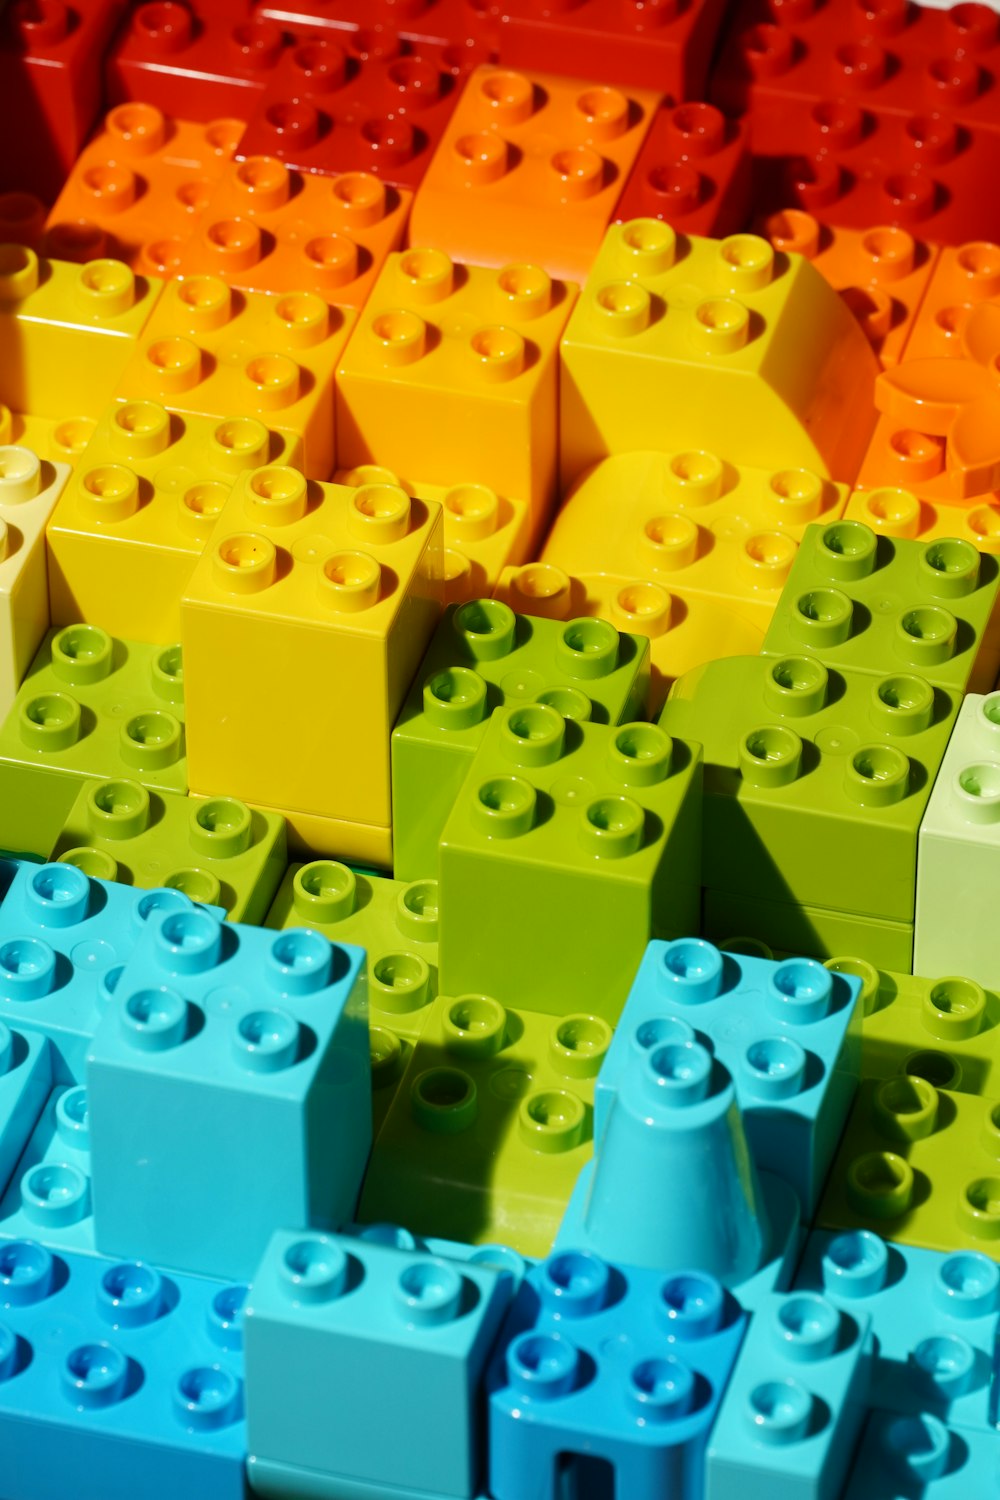 Best 100+ Lego | Download Free Images & Stock Photos on Unsplash